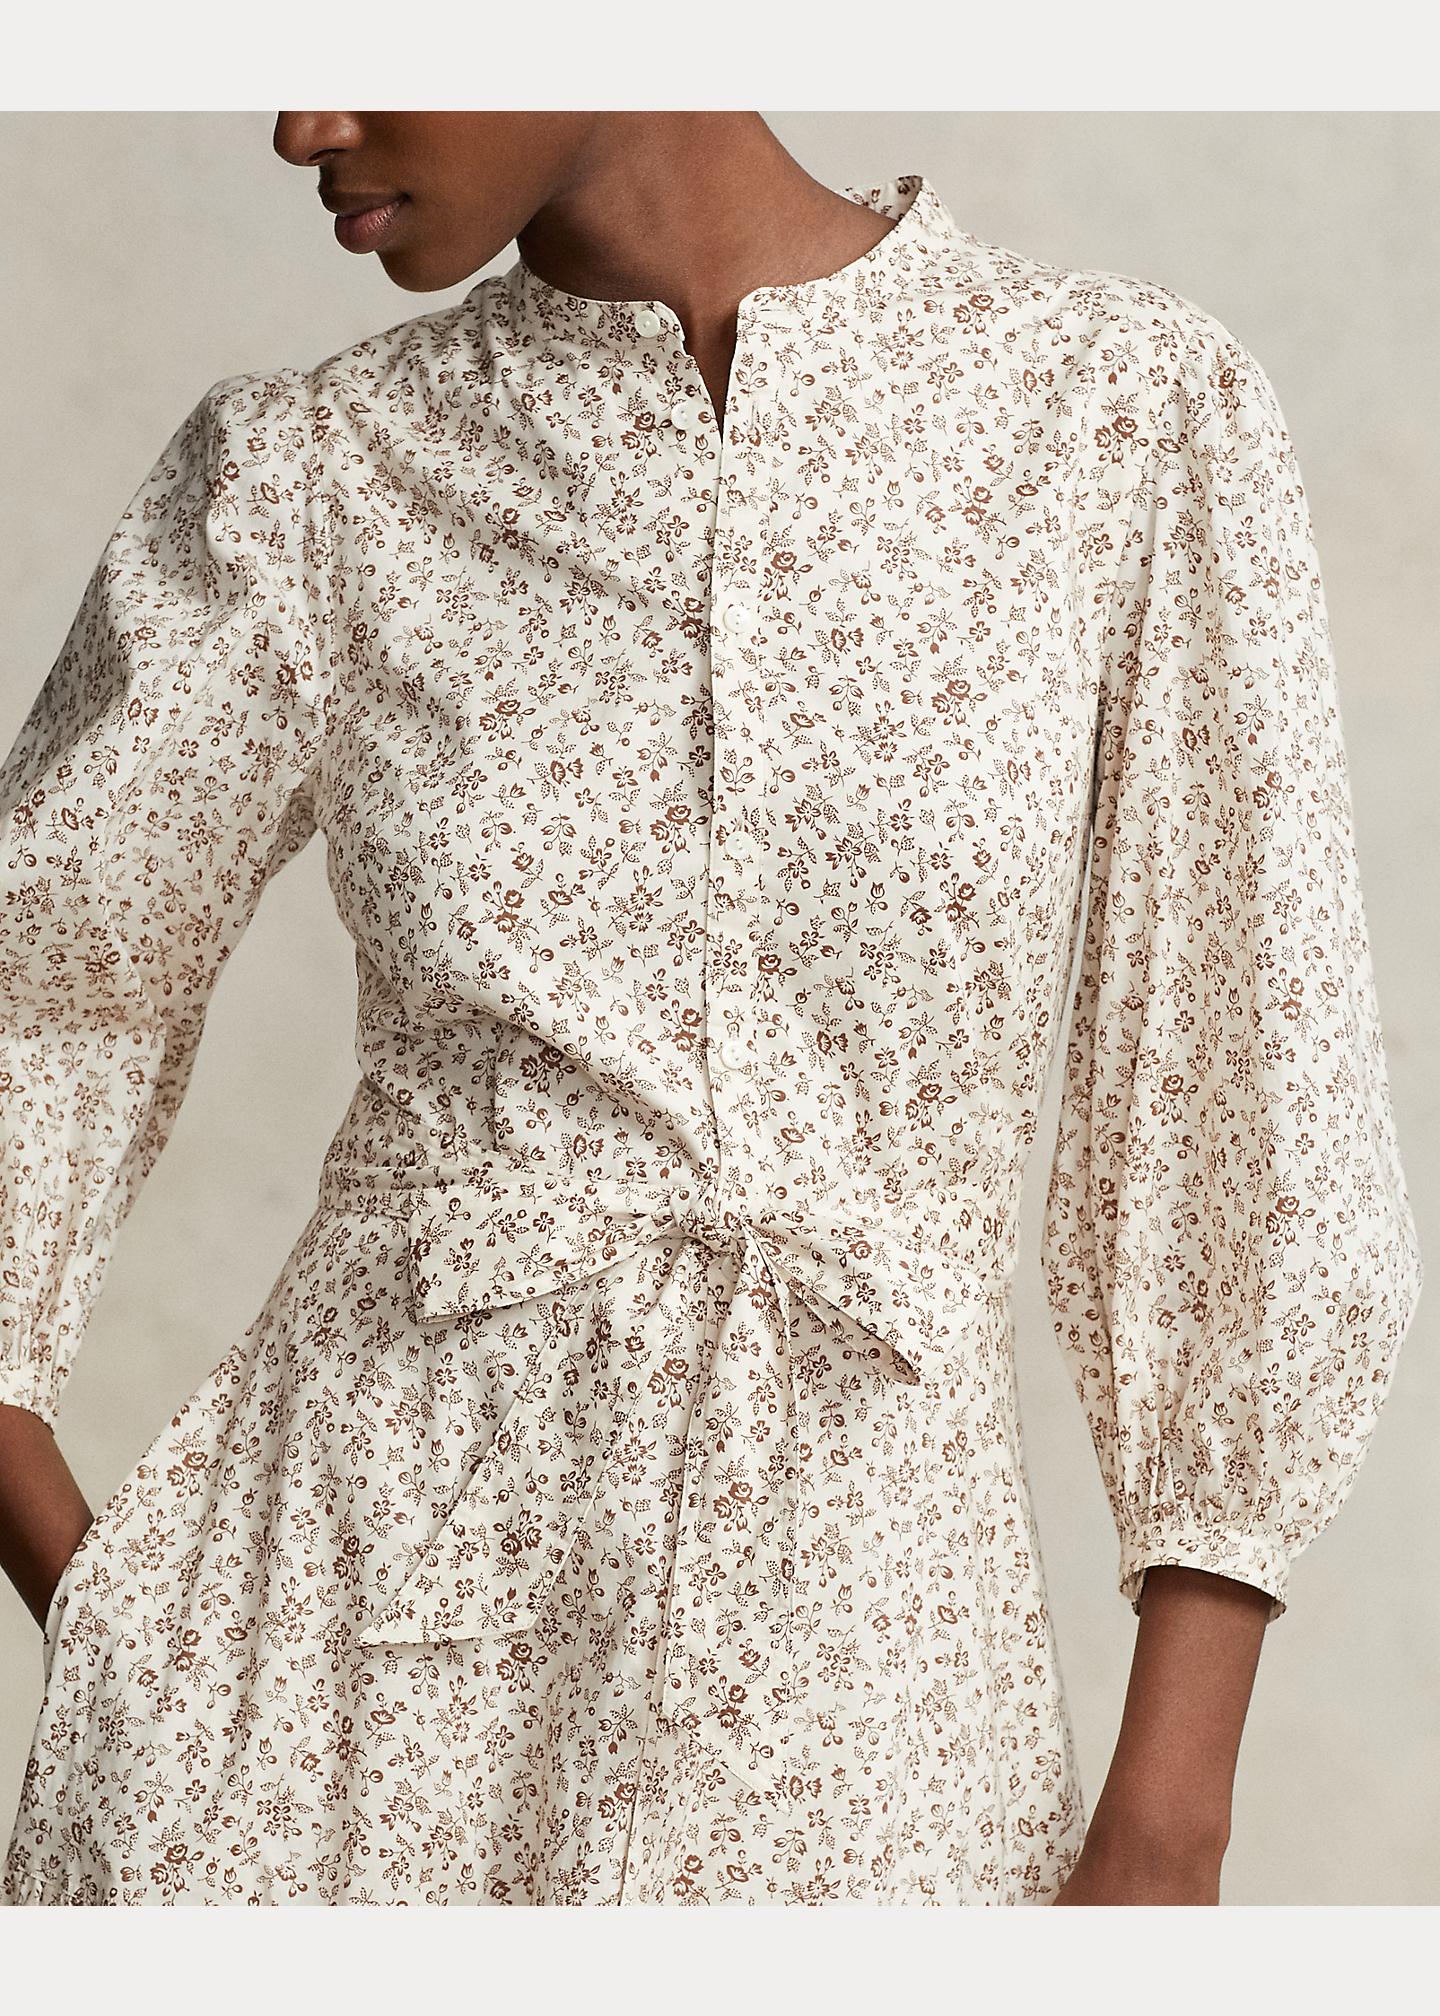 Polo Ralph Lauren Belted Floral Cotton Tiered Dress in Natural | Lyst UK